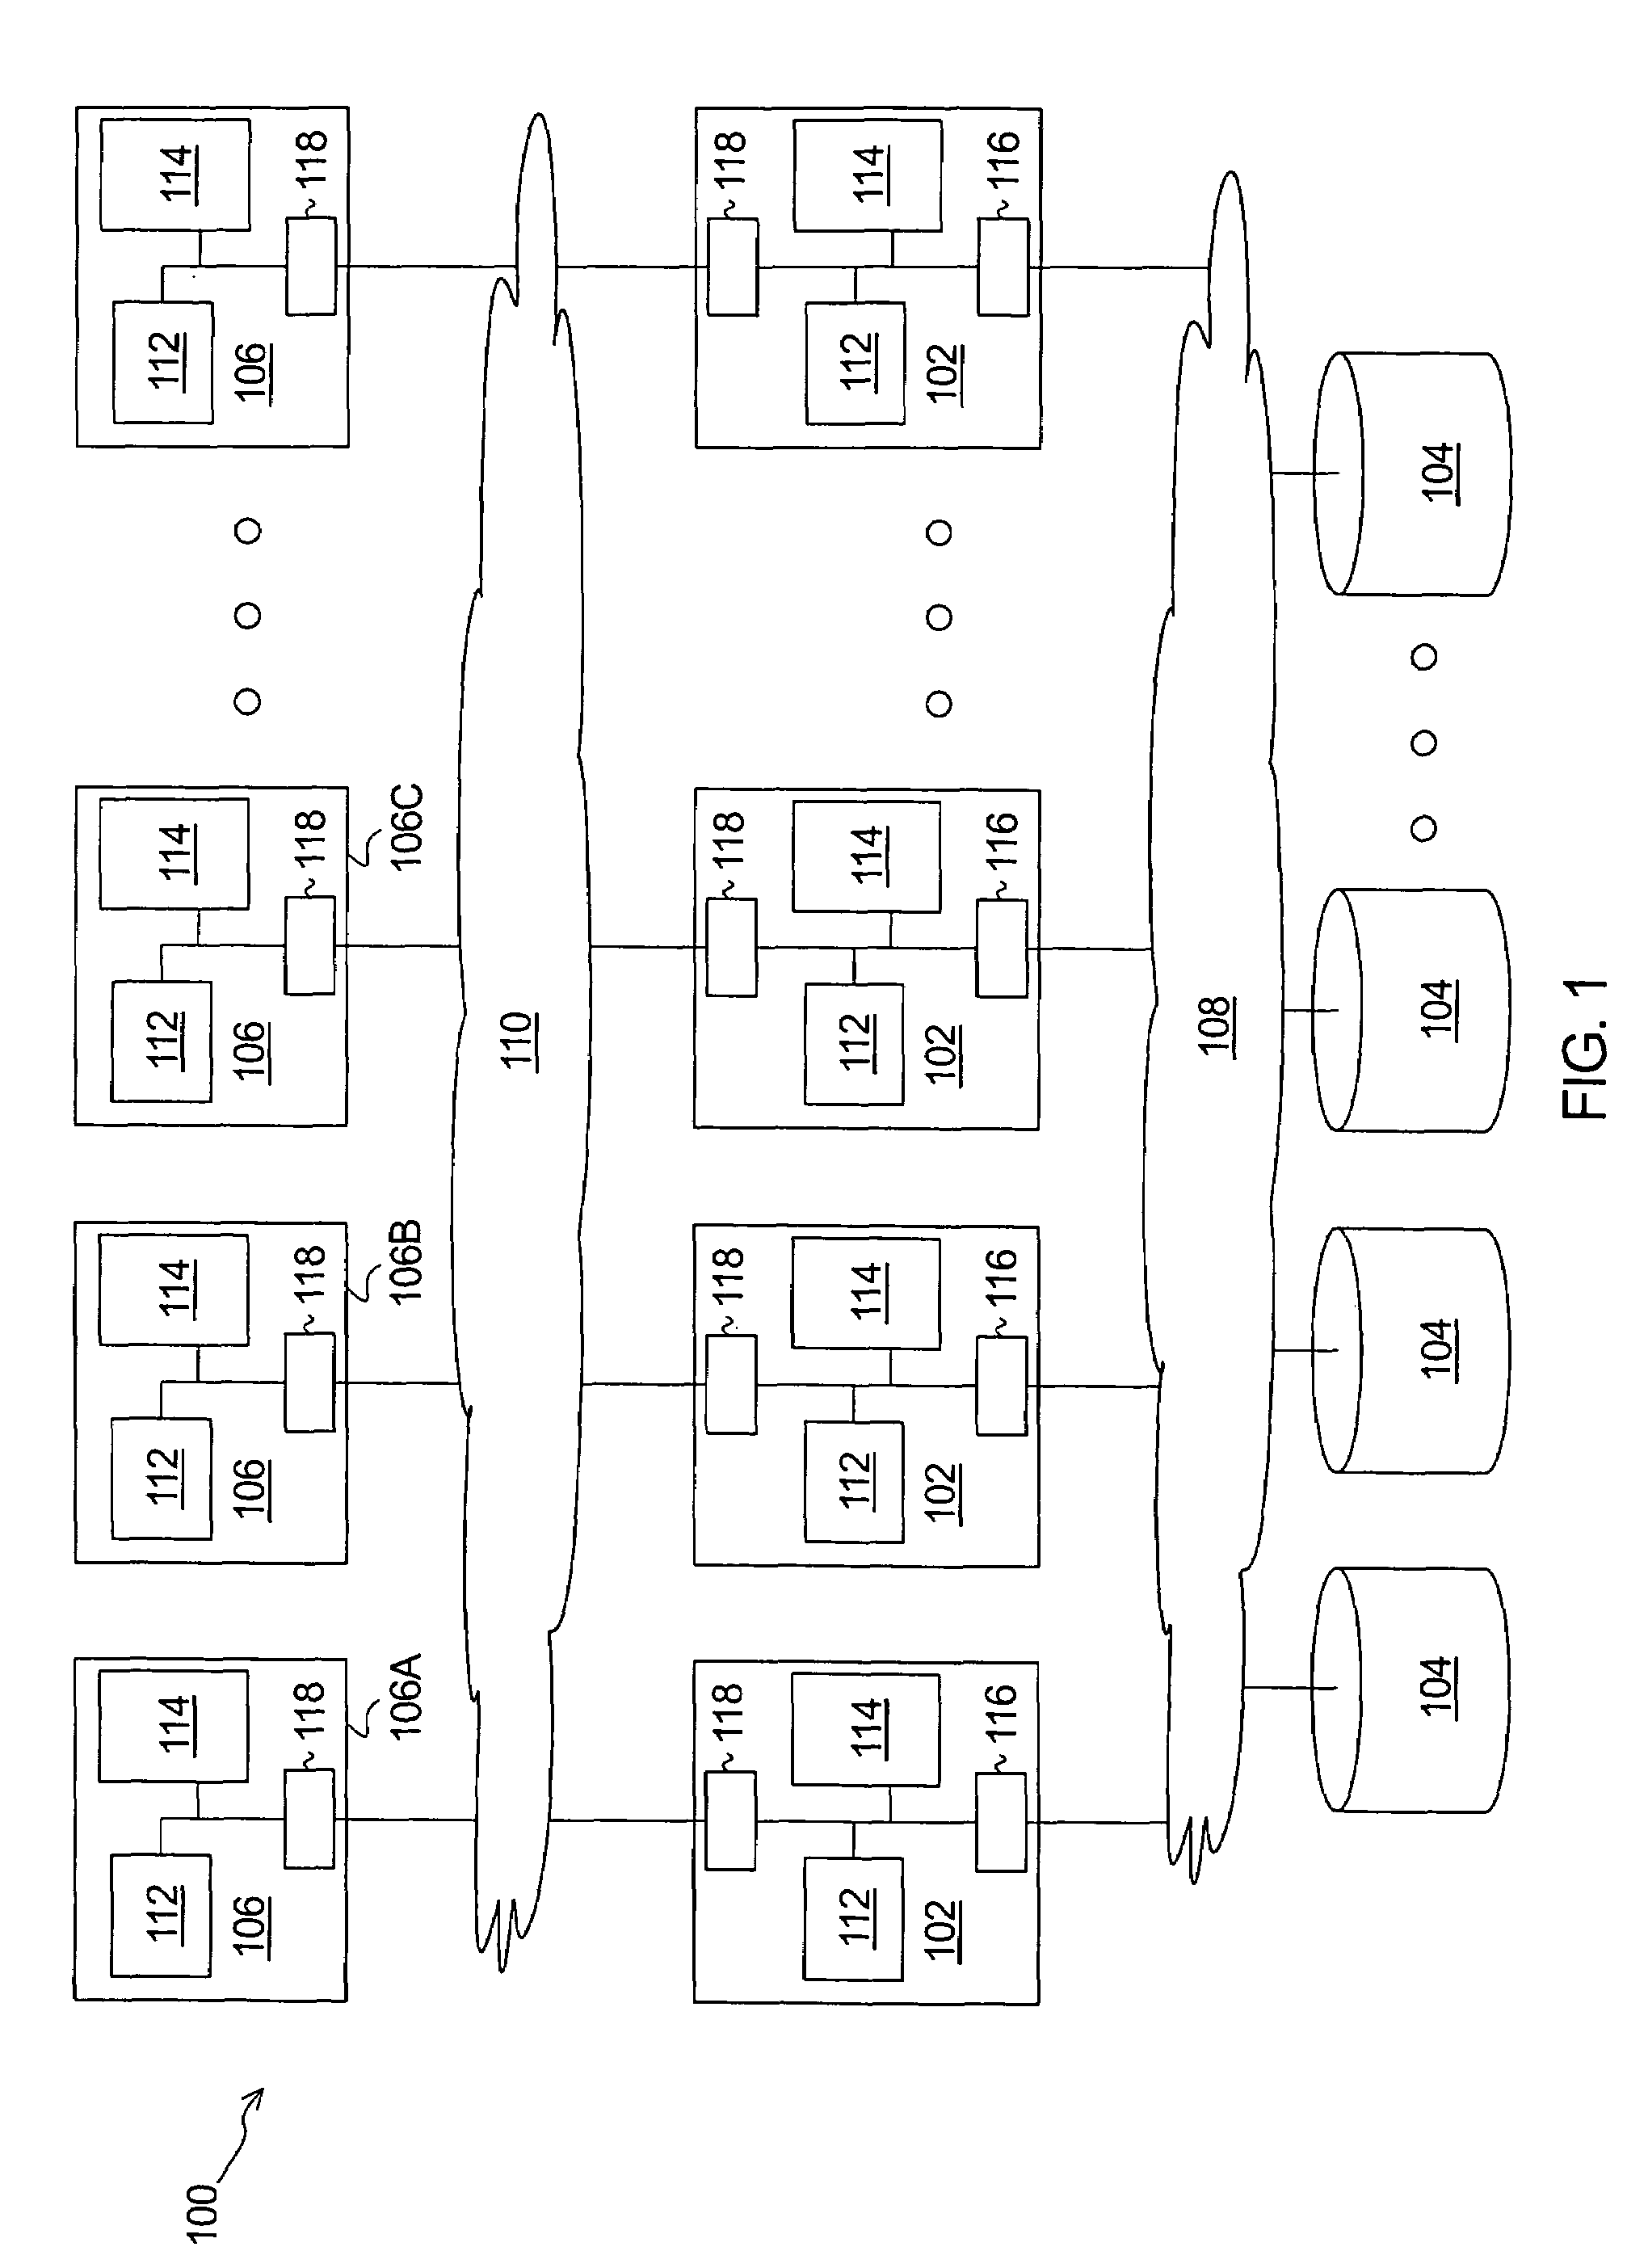 Method of controlling access to computing resource within shared computing environment